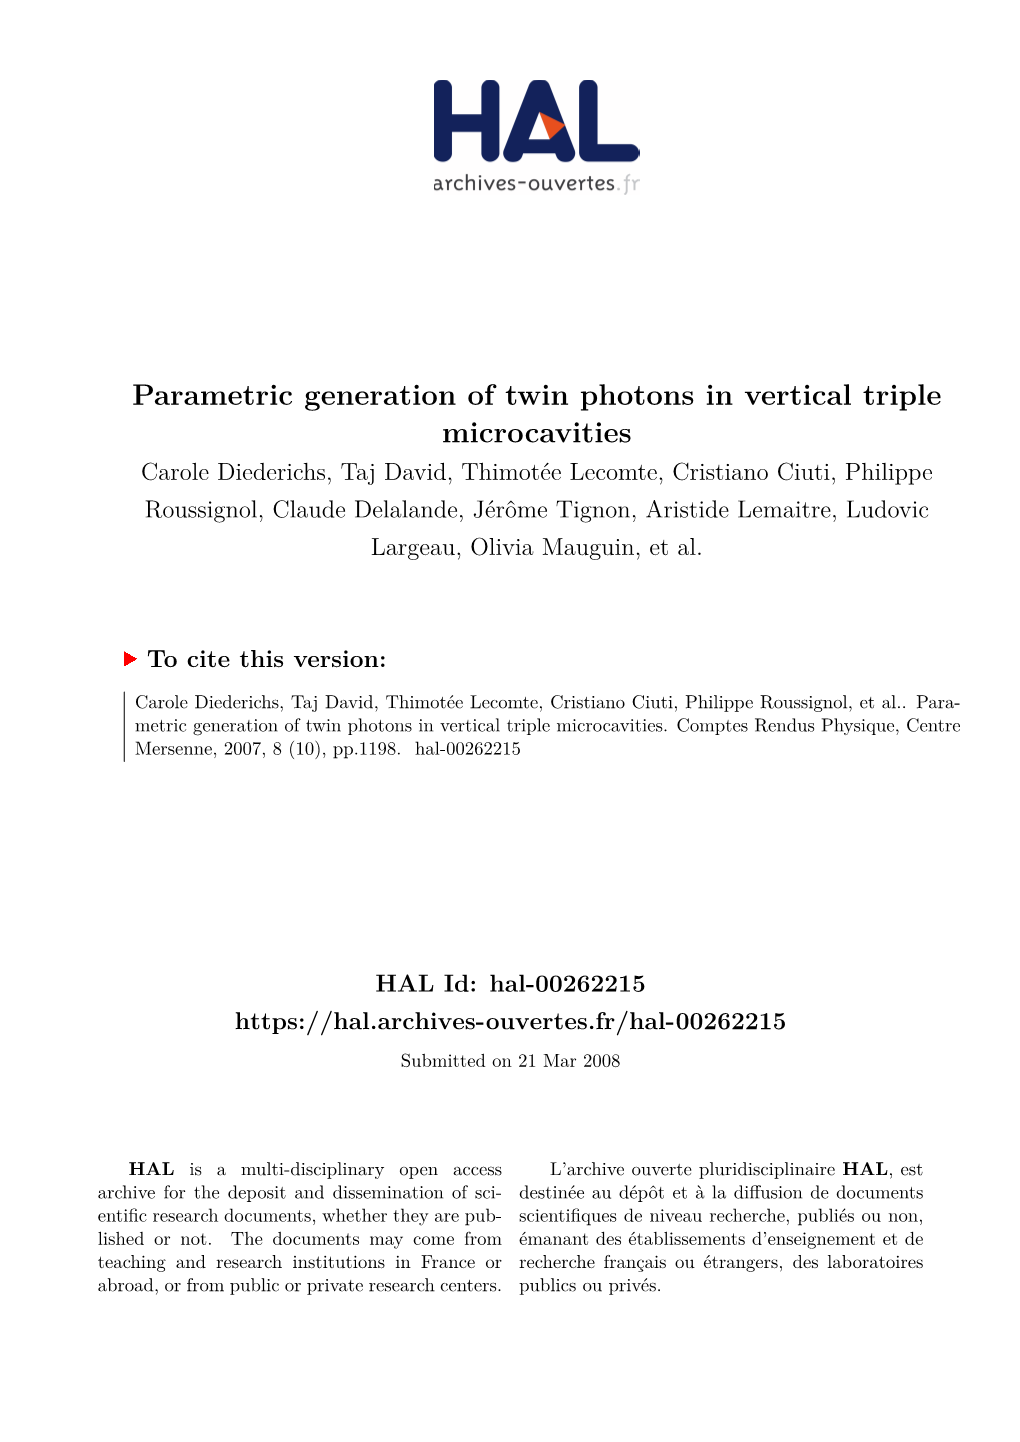 Parametric Generation of Twin Photons in Vertical Triple Microcavities